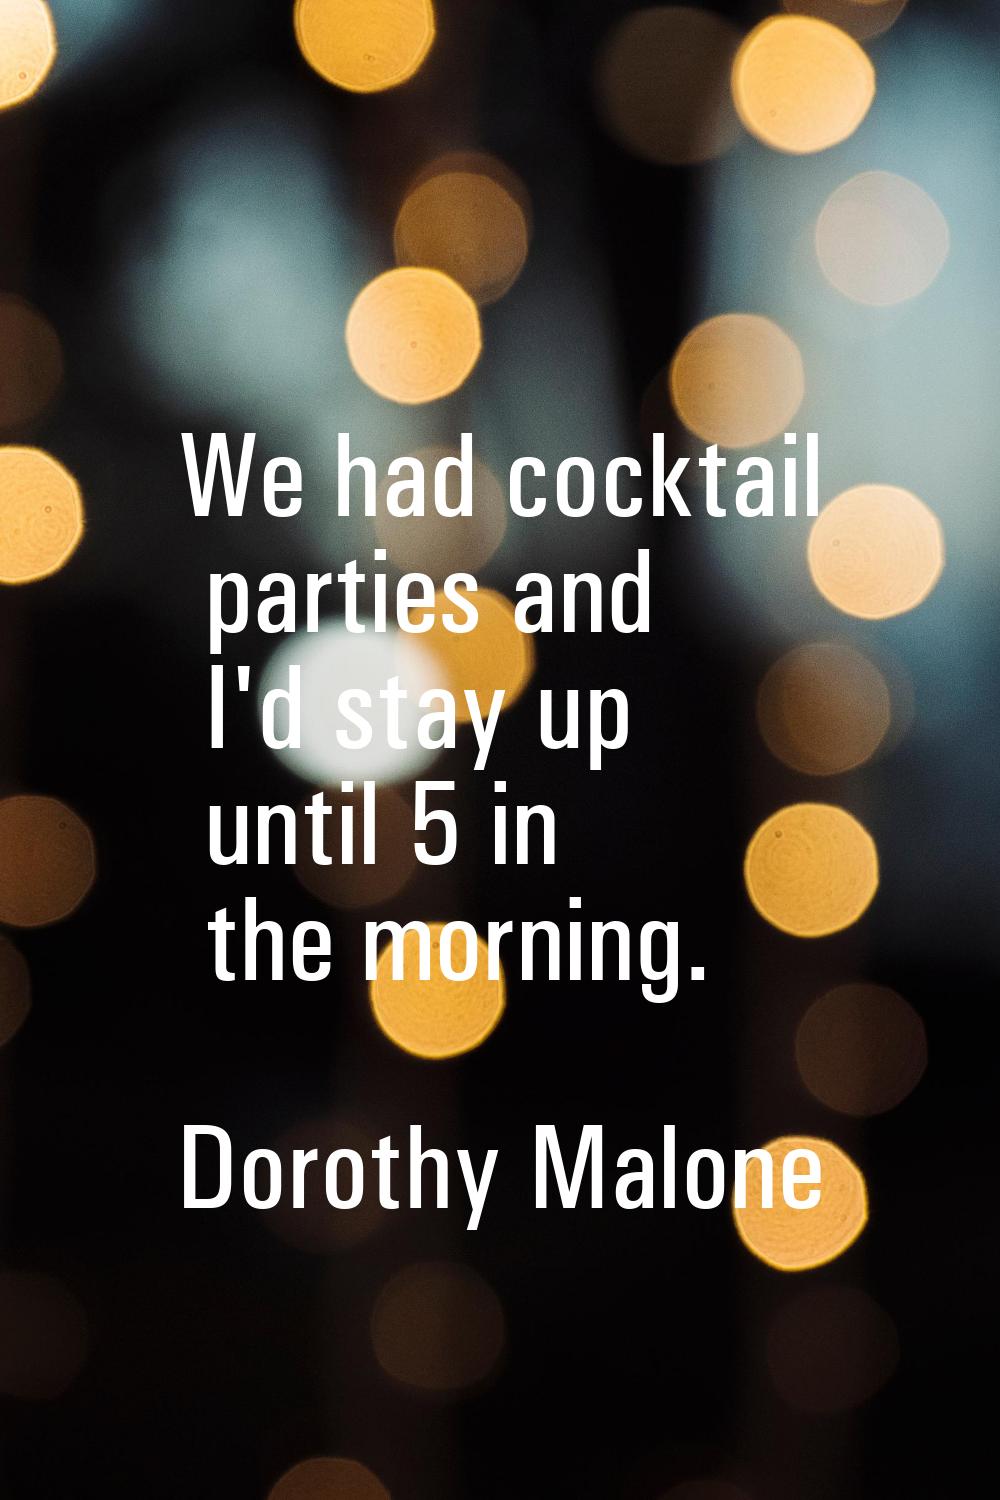 We had cocktail parties and I'd stay up until 5 in the morning.